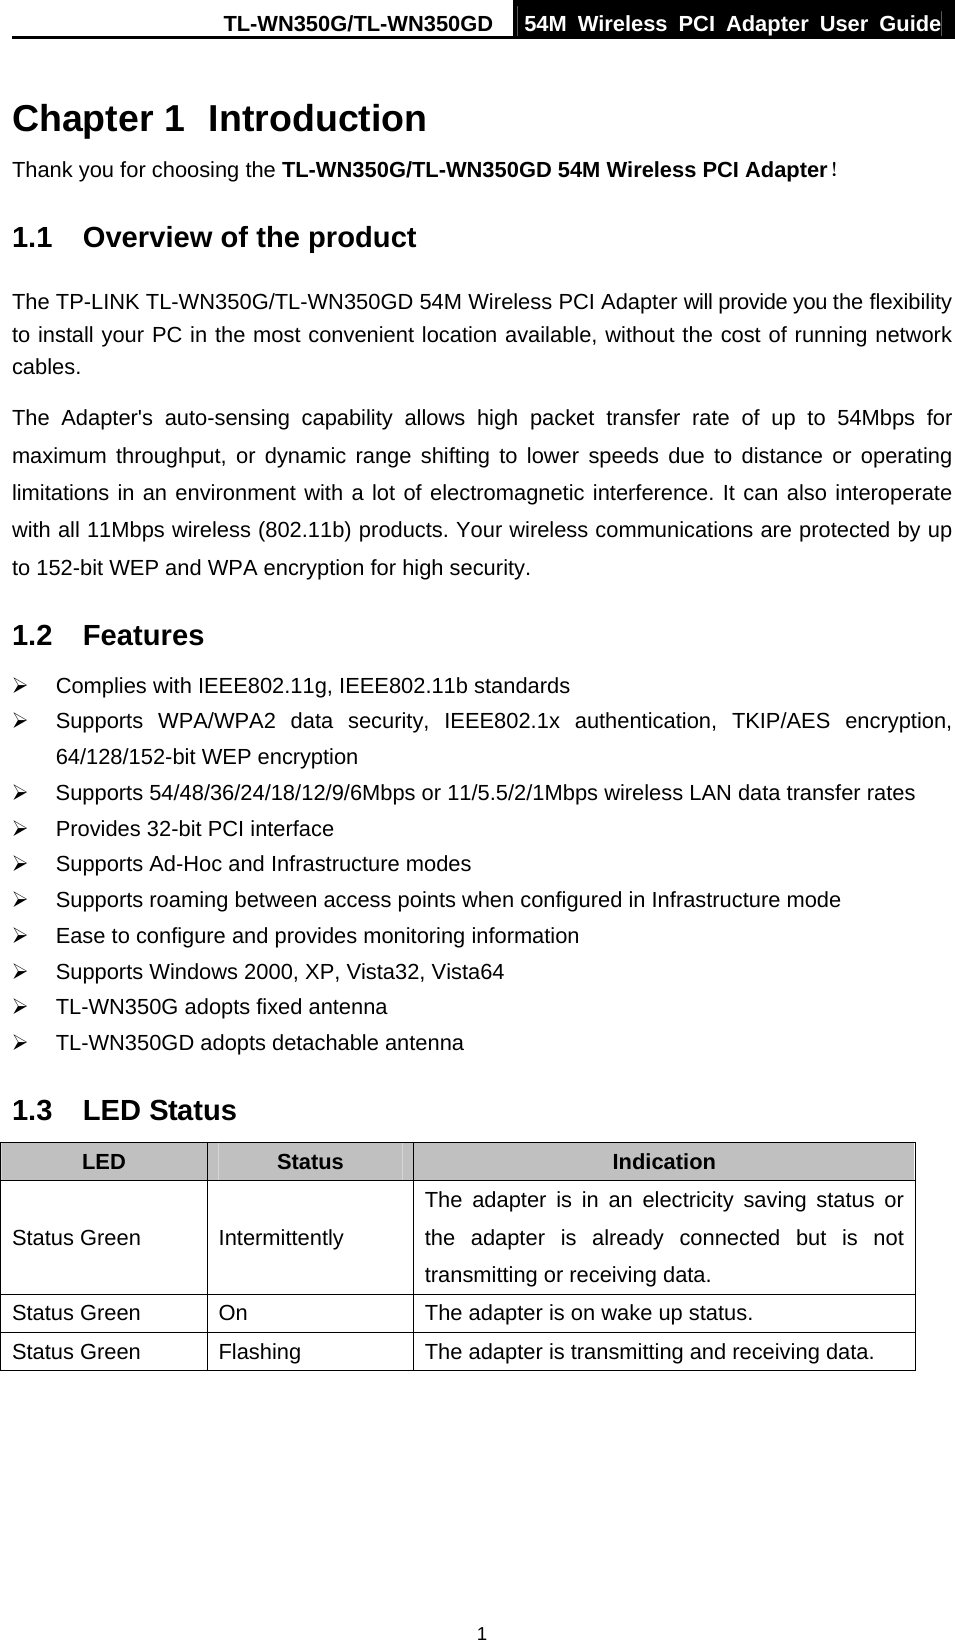 TL-WN350G/TL-WN350GD  54M Wireless PCI Adapter User Guide  1Chapter 1  Introduction Thank you for choosing the TL-WN350G/TL-WN350GD 54M Wireless PCI Adapter！ 1.1  Overview of the product The TP-LINK TL-WN350G/TL-WN350GD 54M Wireless PCI Adapter will provide you the flexibility to install your PC in the most convenient location available, without the cost of running network cables. The Adapter&apos;s auto-sensing capability allows high packet transfer rate of up to 54Mbps for maximum throughput, or dynamic range shifting to lower speeds due to distance or operating limitations in an environment with a lot of electromagnetic interference. It can also interoperate with all 11Mbps wireless (802.11b) products. Your wireless communications are protected by up to 152-bit WEP and WPA encryption for high security. 1.2  Features ¾  Complies with IEEE802.11g, IEEE802.11b standards ¾  Supports WPA/WPA2 data security, IEEE802.1x authentication, TKIP/AES encryption, 64/128/152-bit WEP encryption ¾ Supports 54/48/36/24/18/12/9/6Mbps or 11/5.5/2/1Mbps wireless LAN data transfer rates ¾  Provides 32-bit PCI interface ¾  Supports Ad-Hoc and Infrastructure modes ¾  Supports roaming between access points when configured in Infrastructure mode ¾  Ease to configure and provides monitoring information ¾  Supports Windows 2000, XP, Vista32, Vista64   ¾  TL-WN350G adopts fixed antenna   ¾  TL-WN350GD adopts detachable antenna 1.3  LED Status LED  Status  Indication Status Green  Intermittently   The adapter is in an electricity saving status or the adapter is already connected but is not transmitting or receiving data. Status Green  On  The adapter is on wake up status. Status Green  Flashing  The adapter is transmitting and receiving data.  